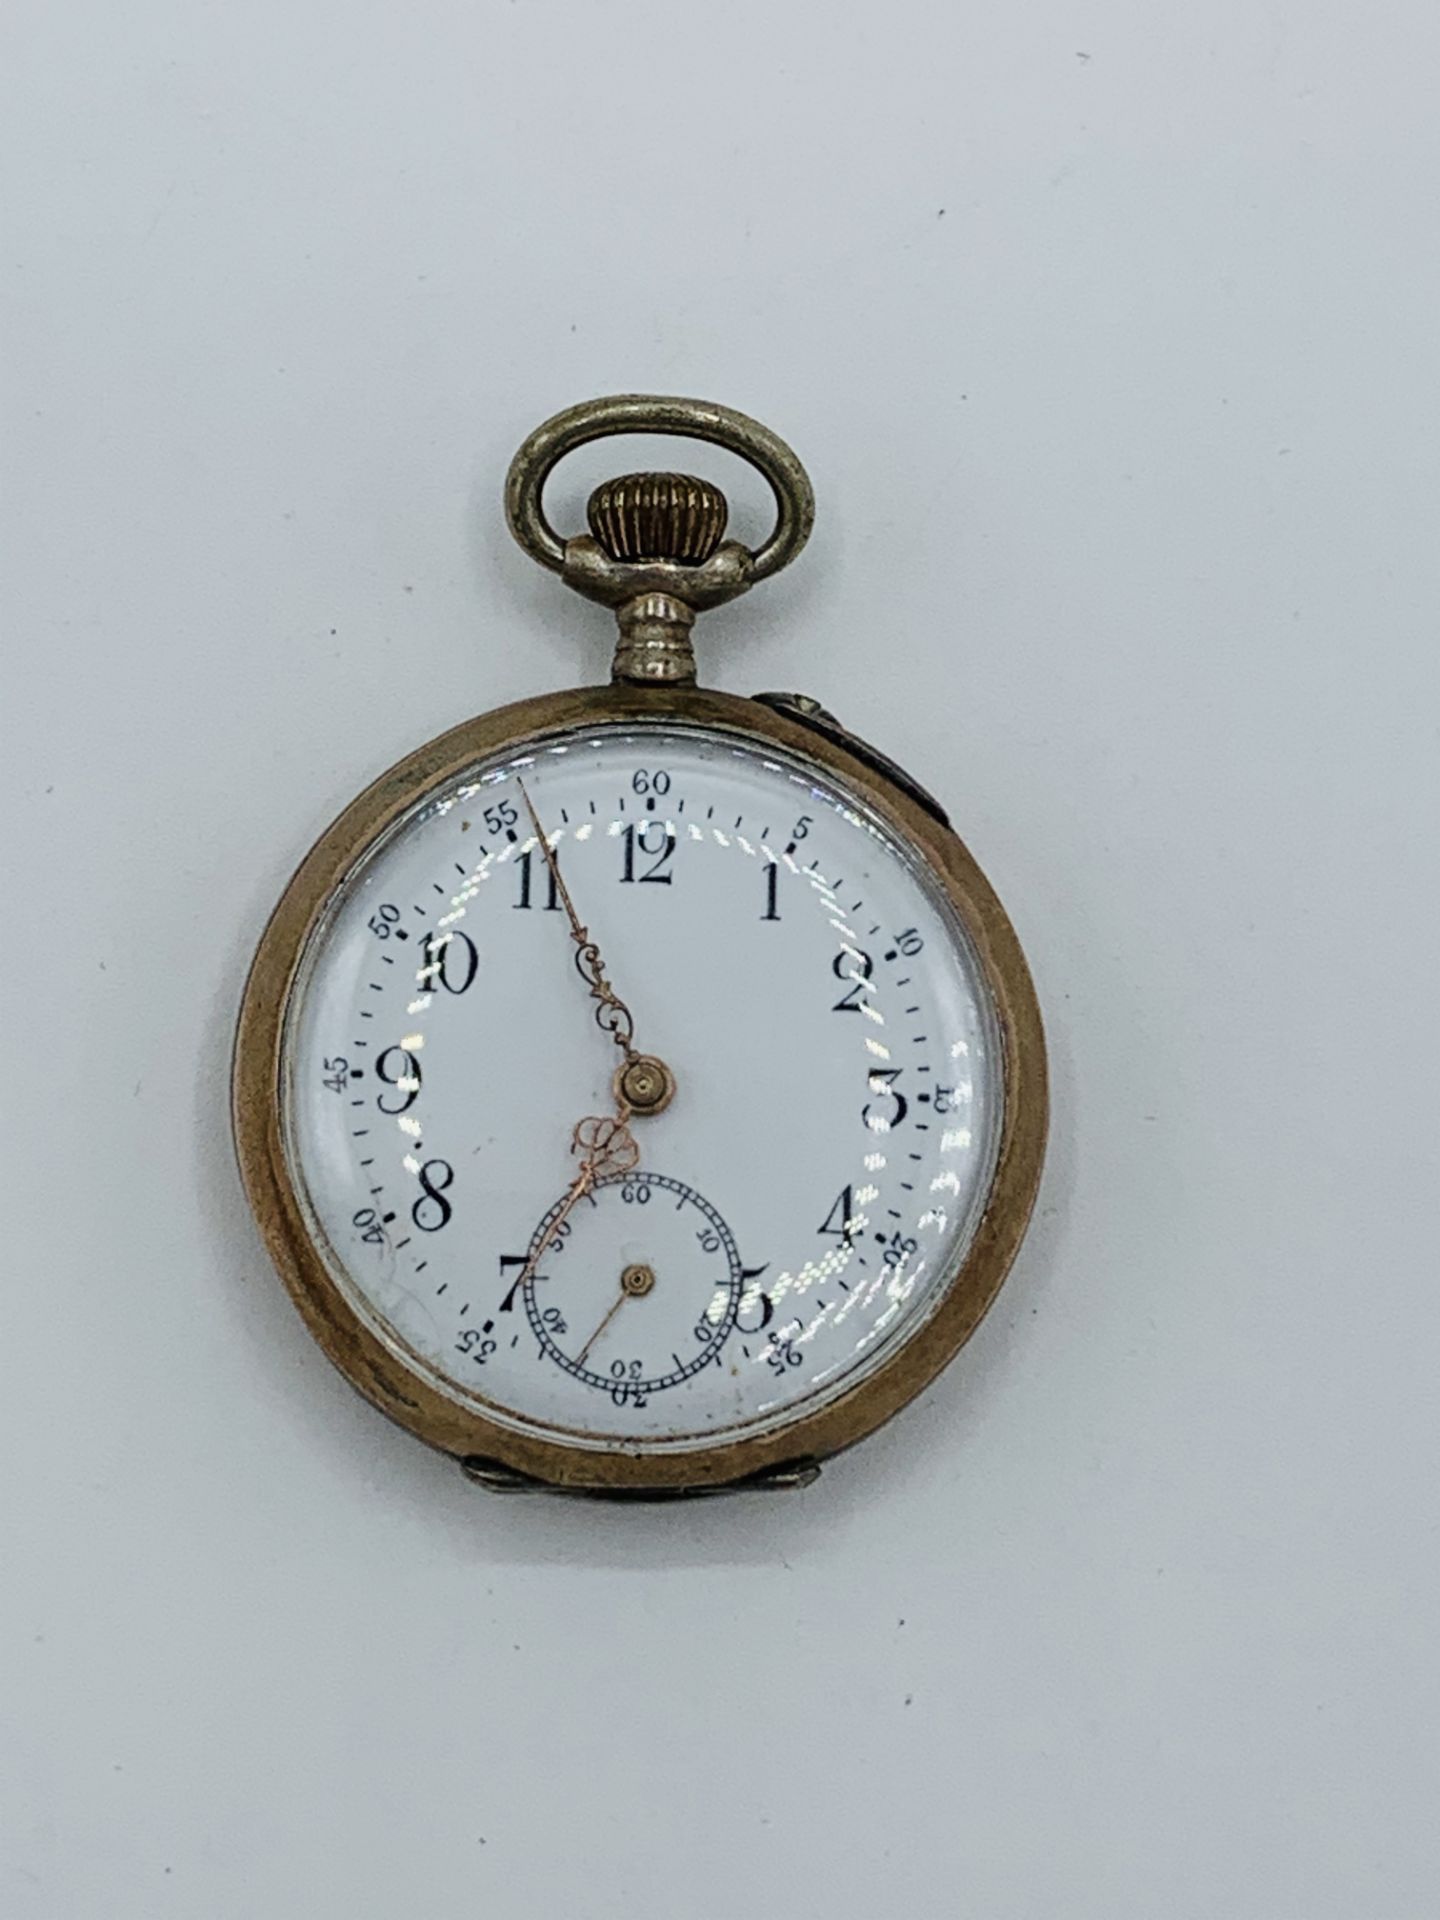 800 silver and gold plate case manual wind lady's pocket watch, in going order